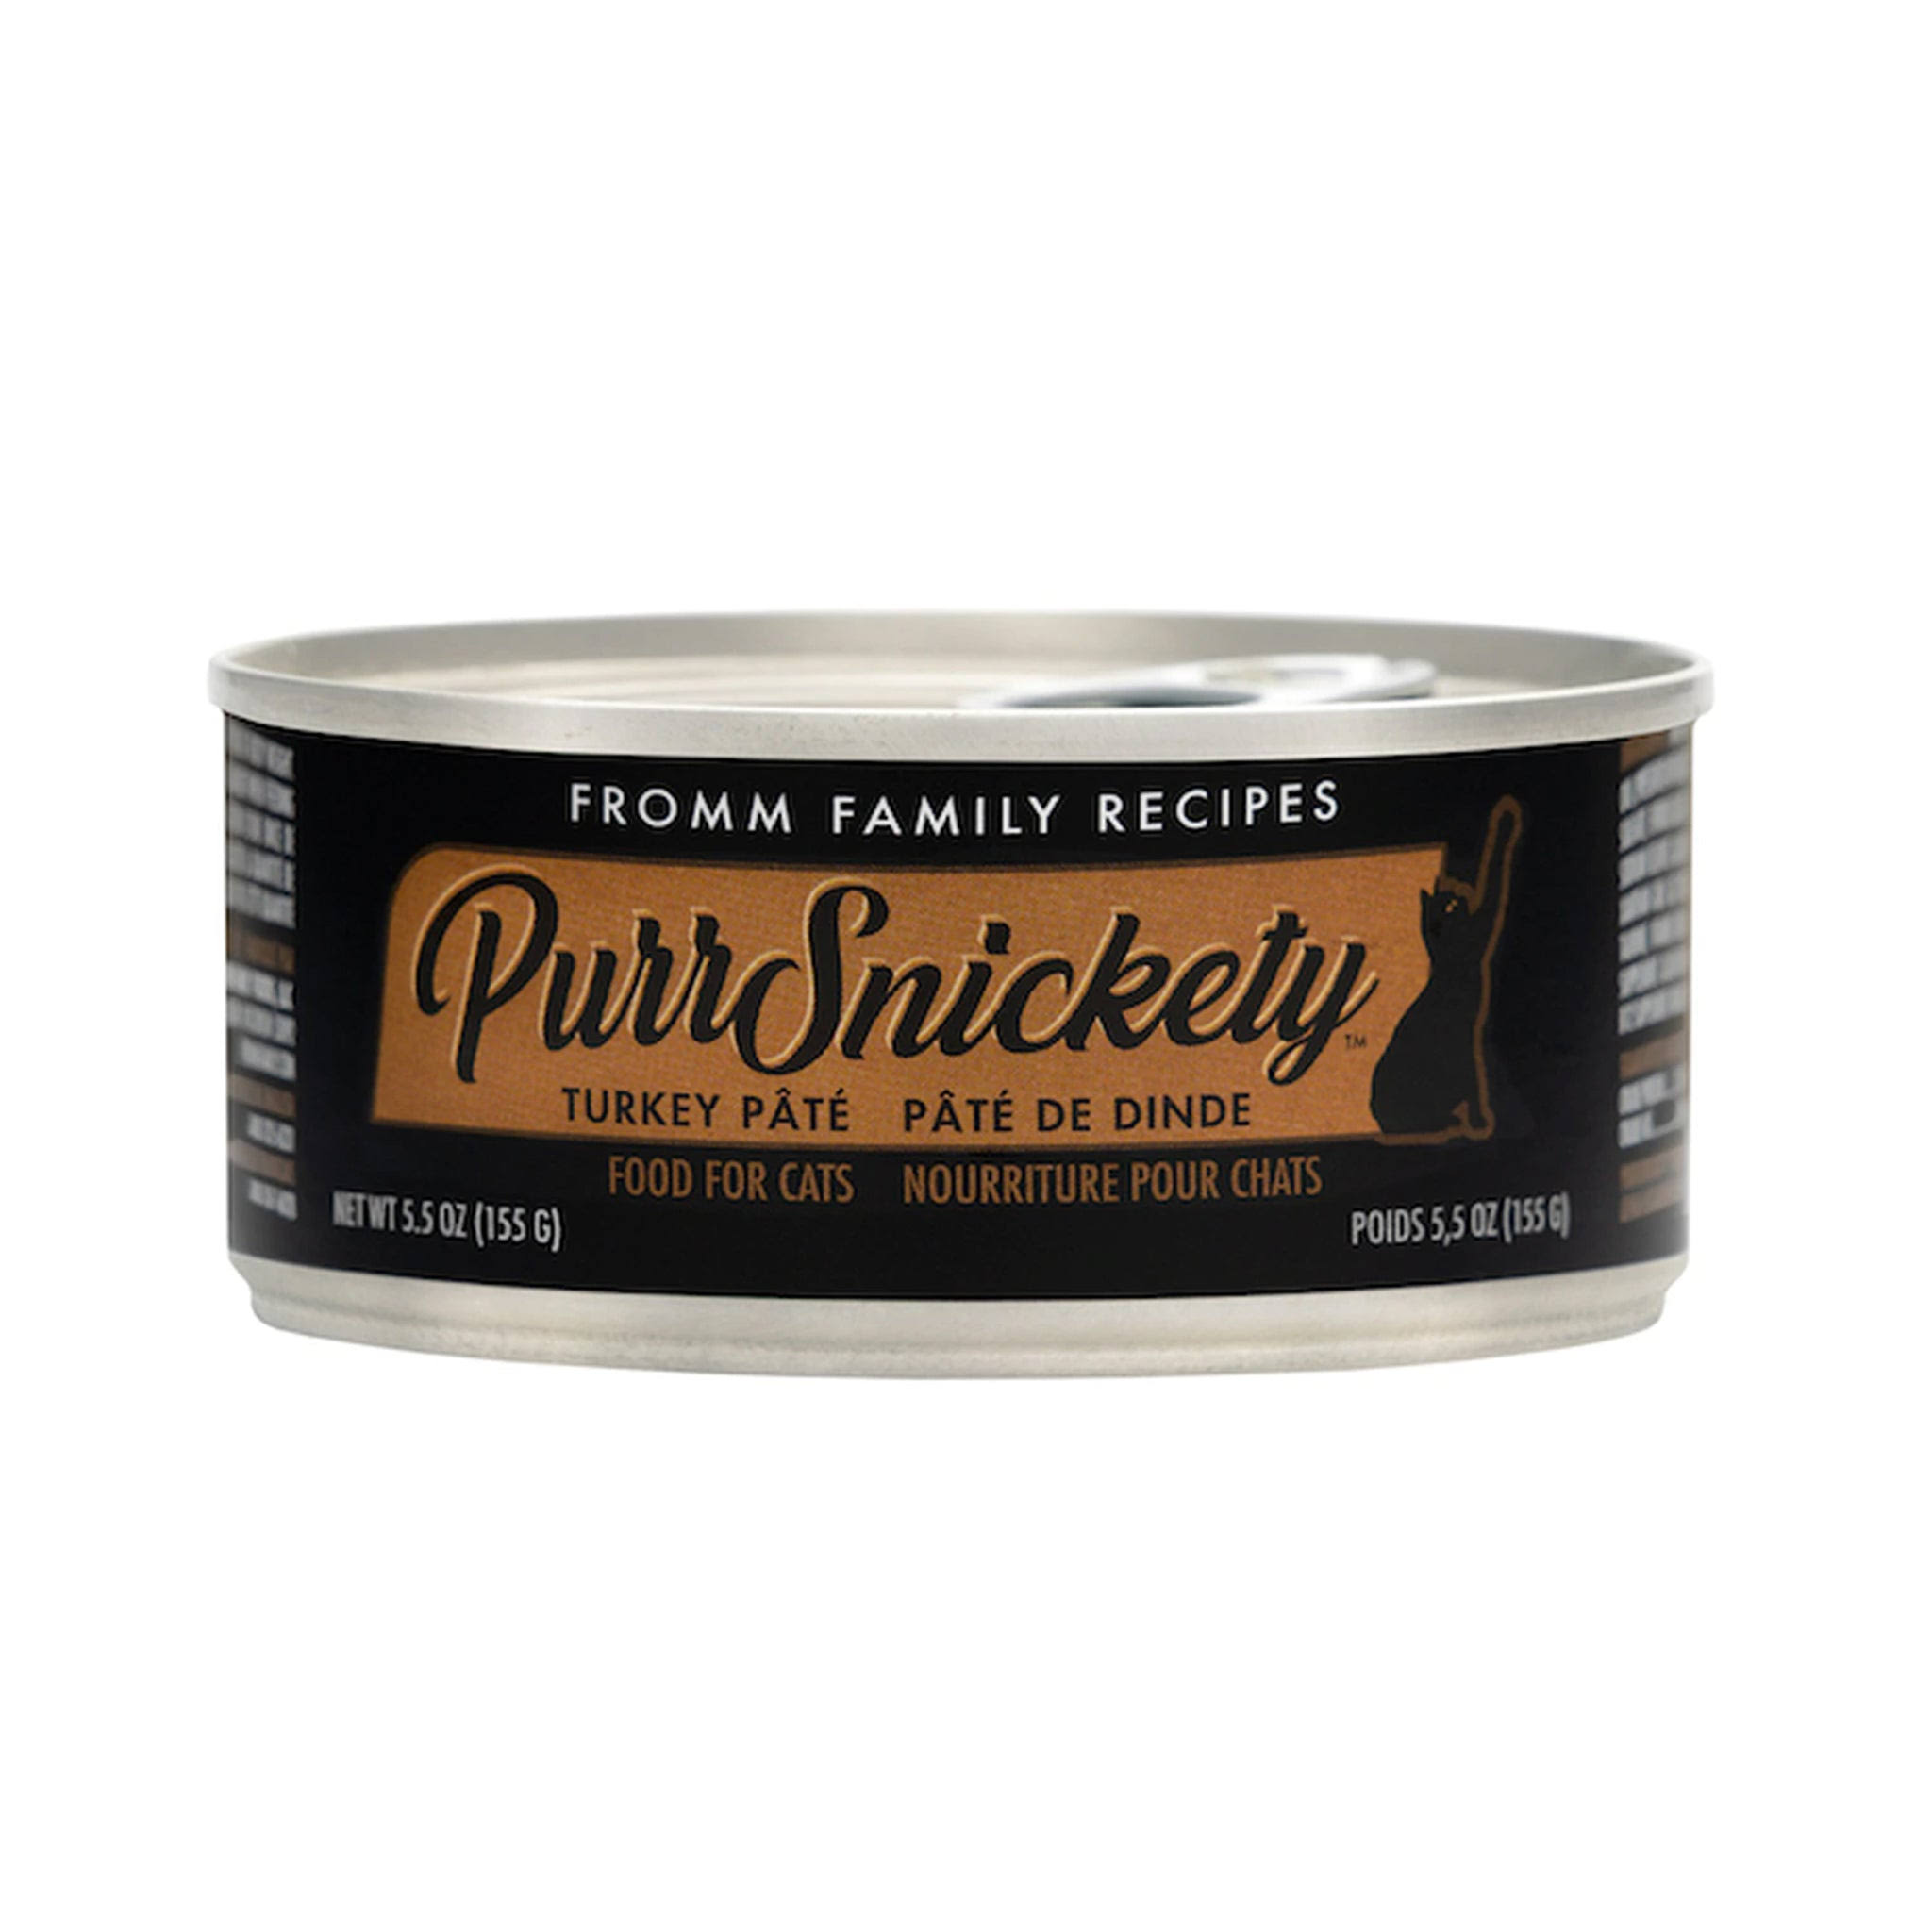 Fromm Family PurrSnickety Turkey Pate Canned Cat Food, 5.5-oz